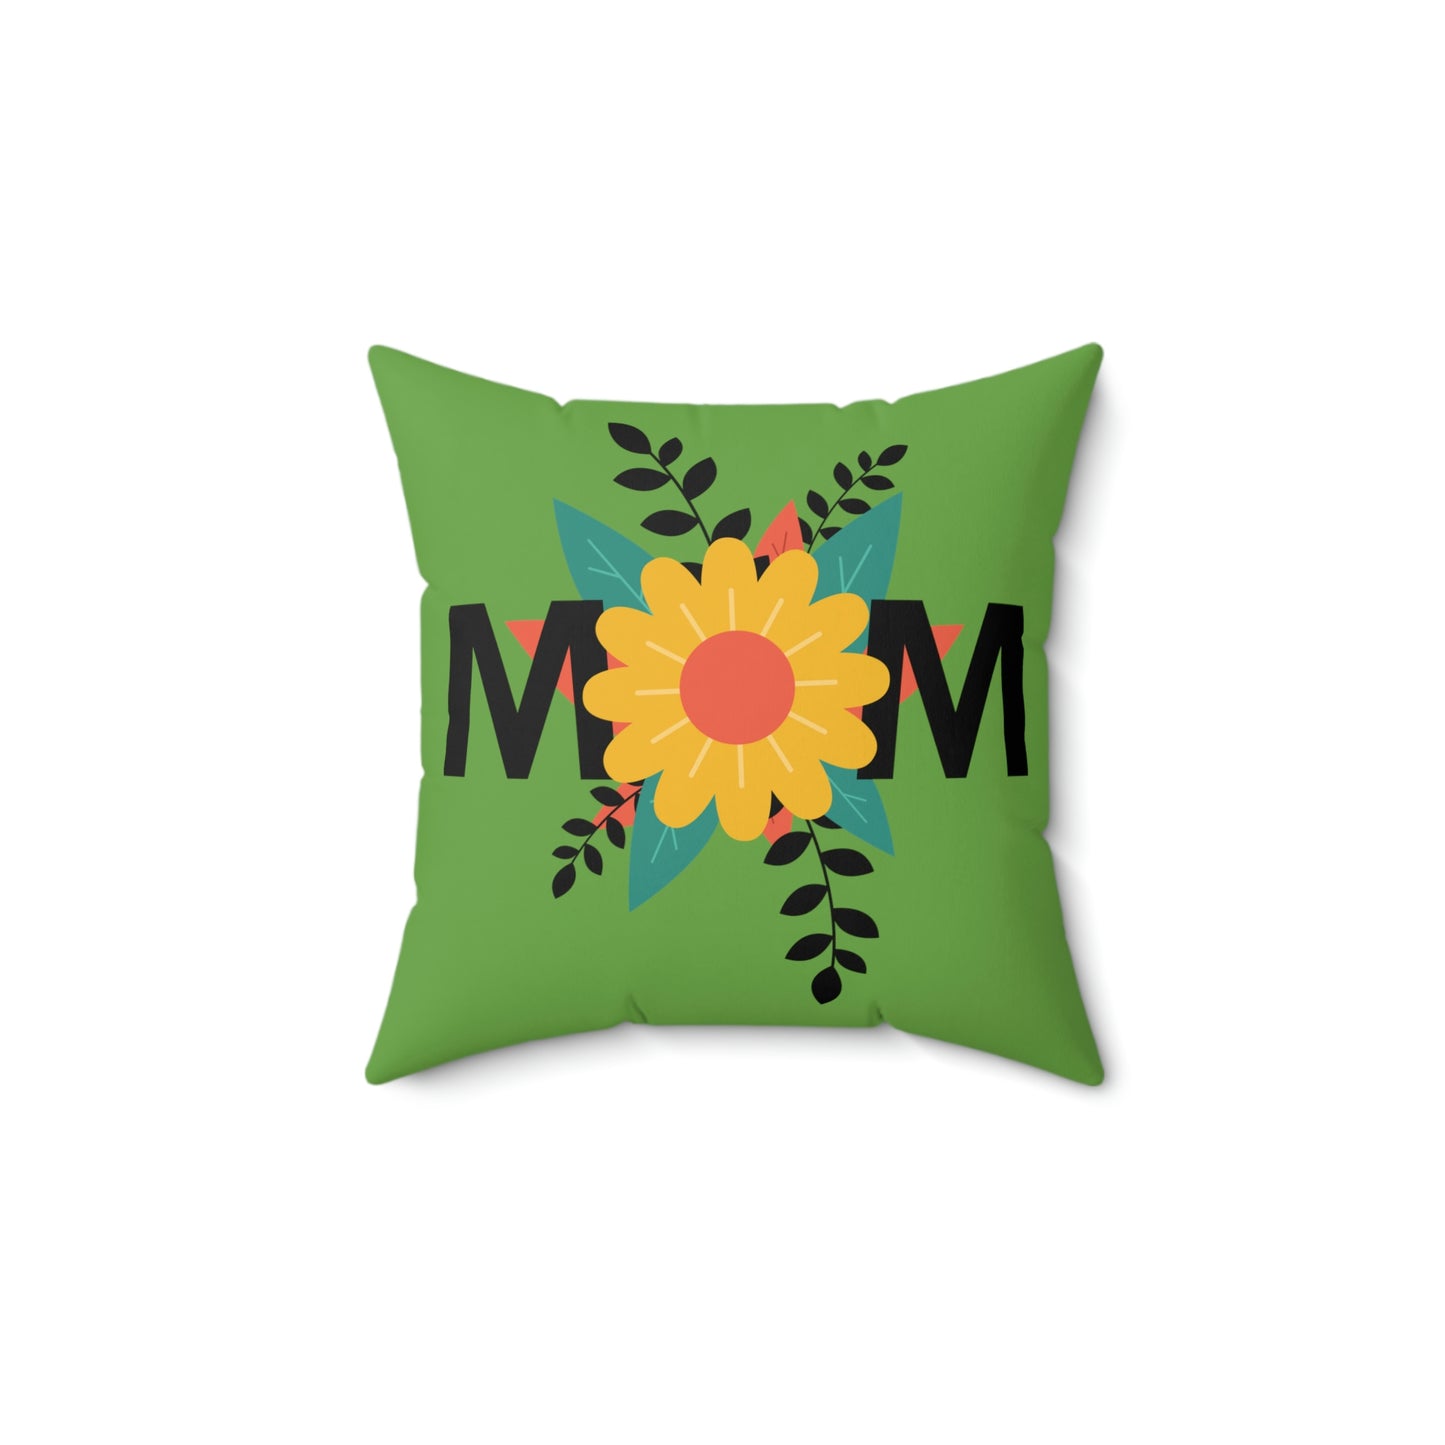 Spun Polyester Square Pillow Case "Mom Flowers on Green”